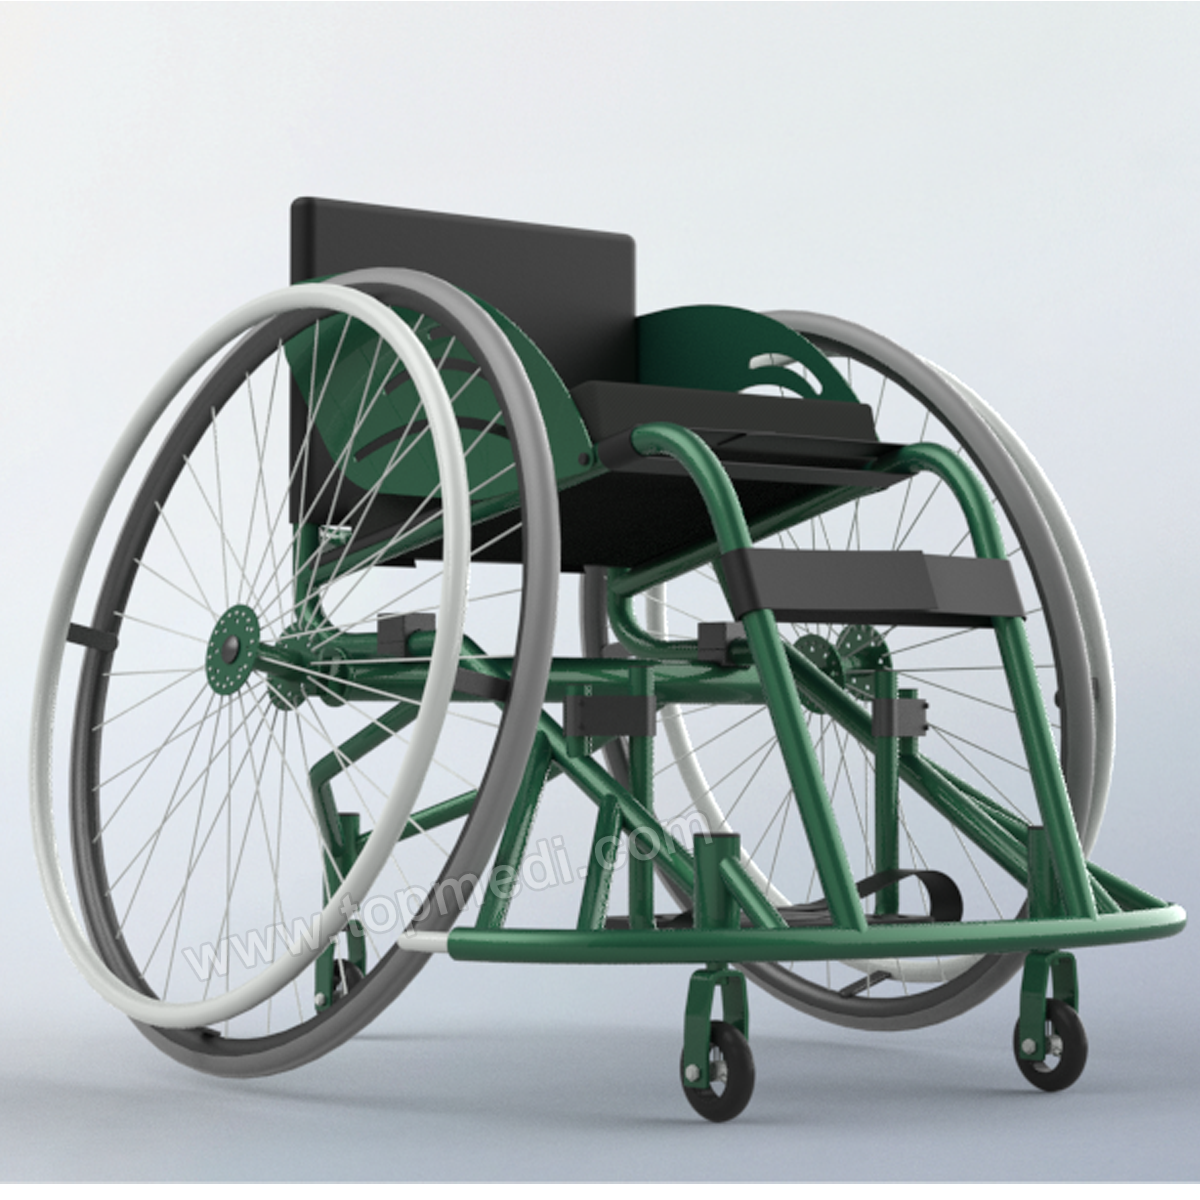 How to maintain the wheelchair in winter?